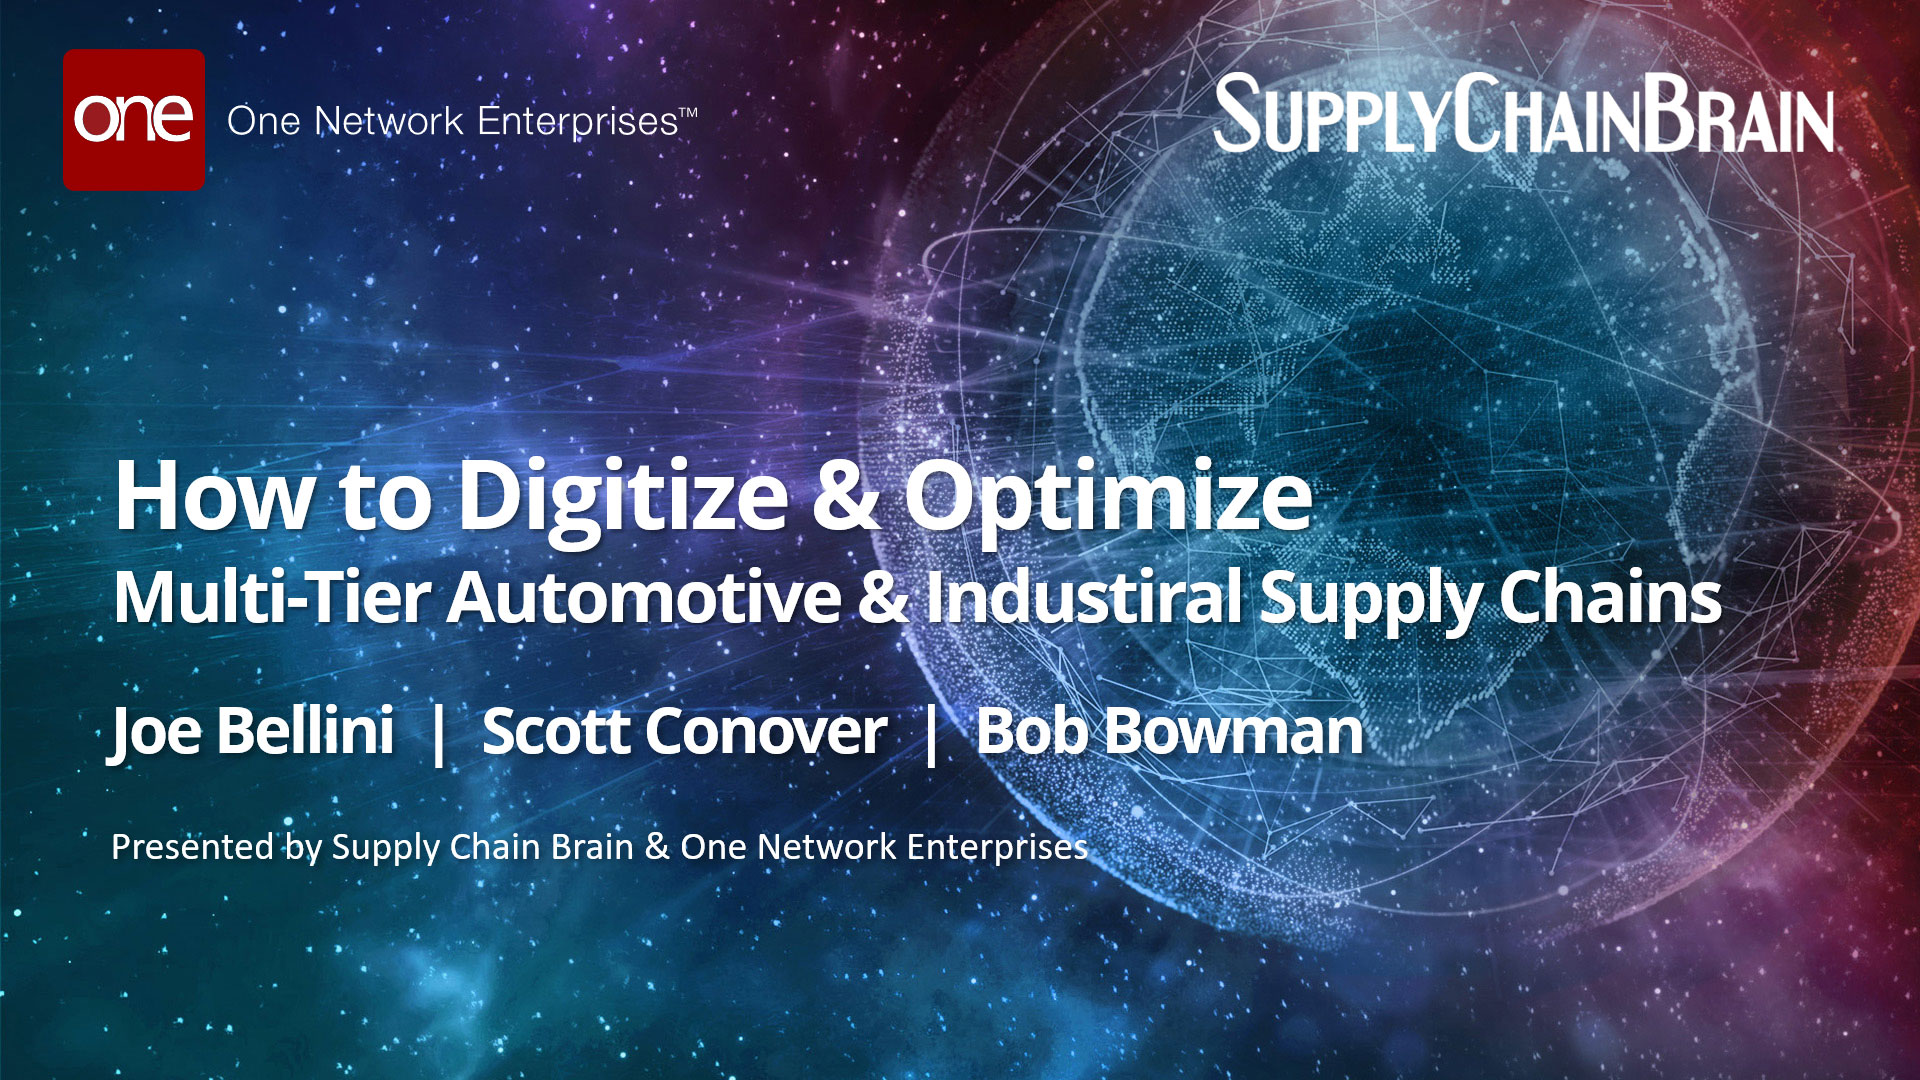 Download the Presentation: Optimizing Multi-Tier Supply Chain Networks